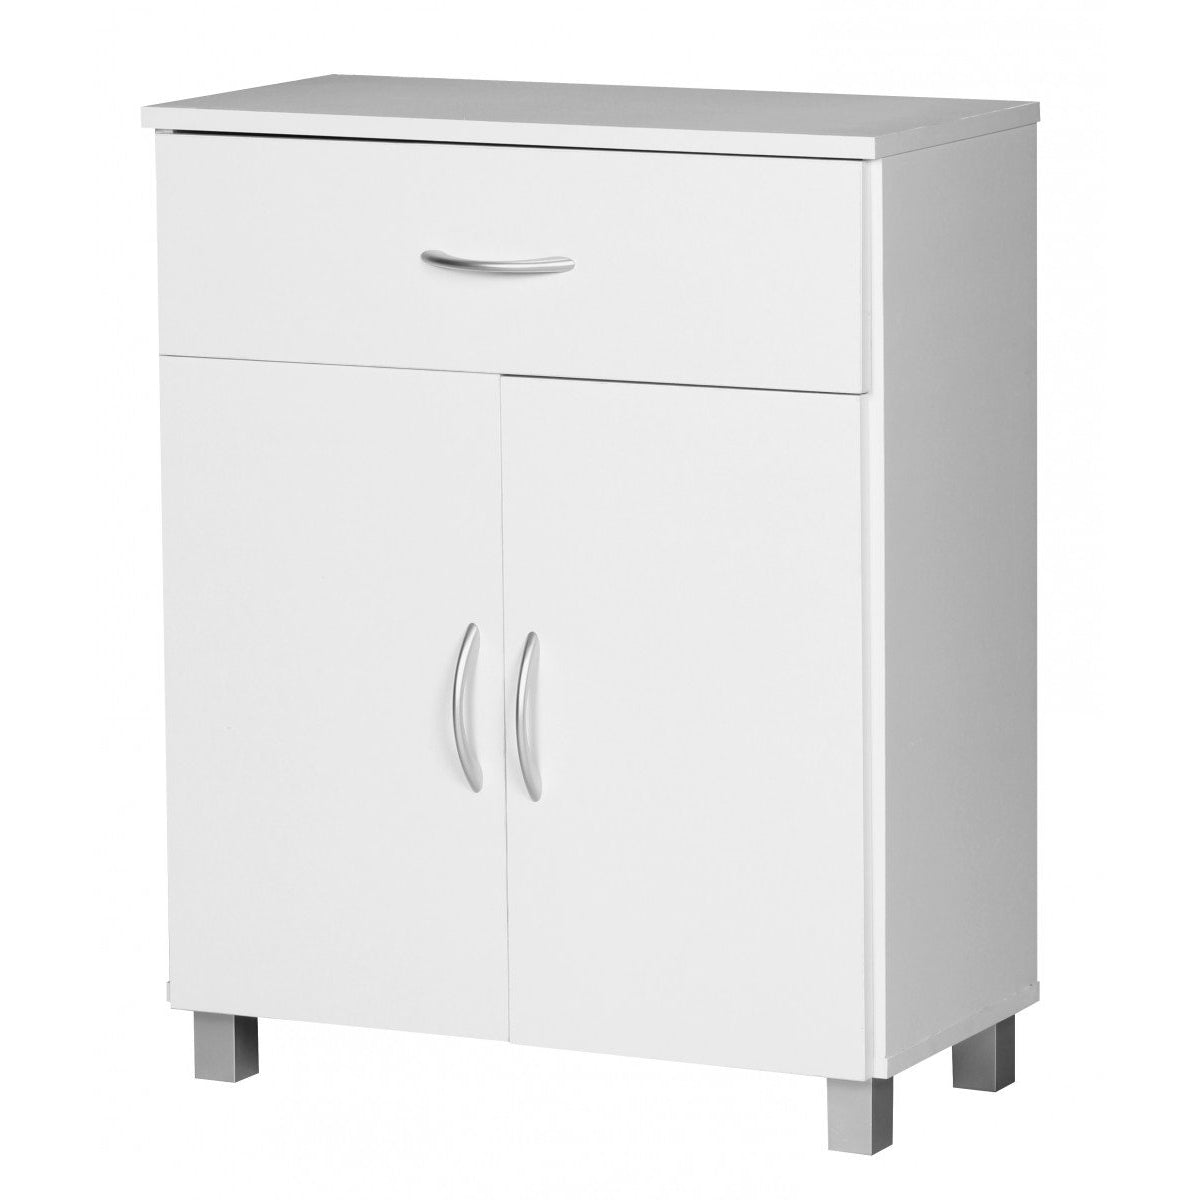 Nancy's Nashua Sideboard - Hallway Cabinet - Drawer - French Doors - Beech - White - Side Cabinet